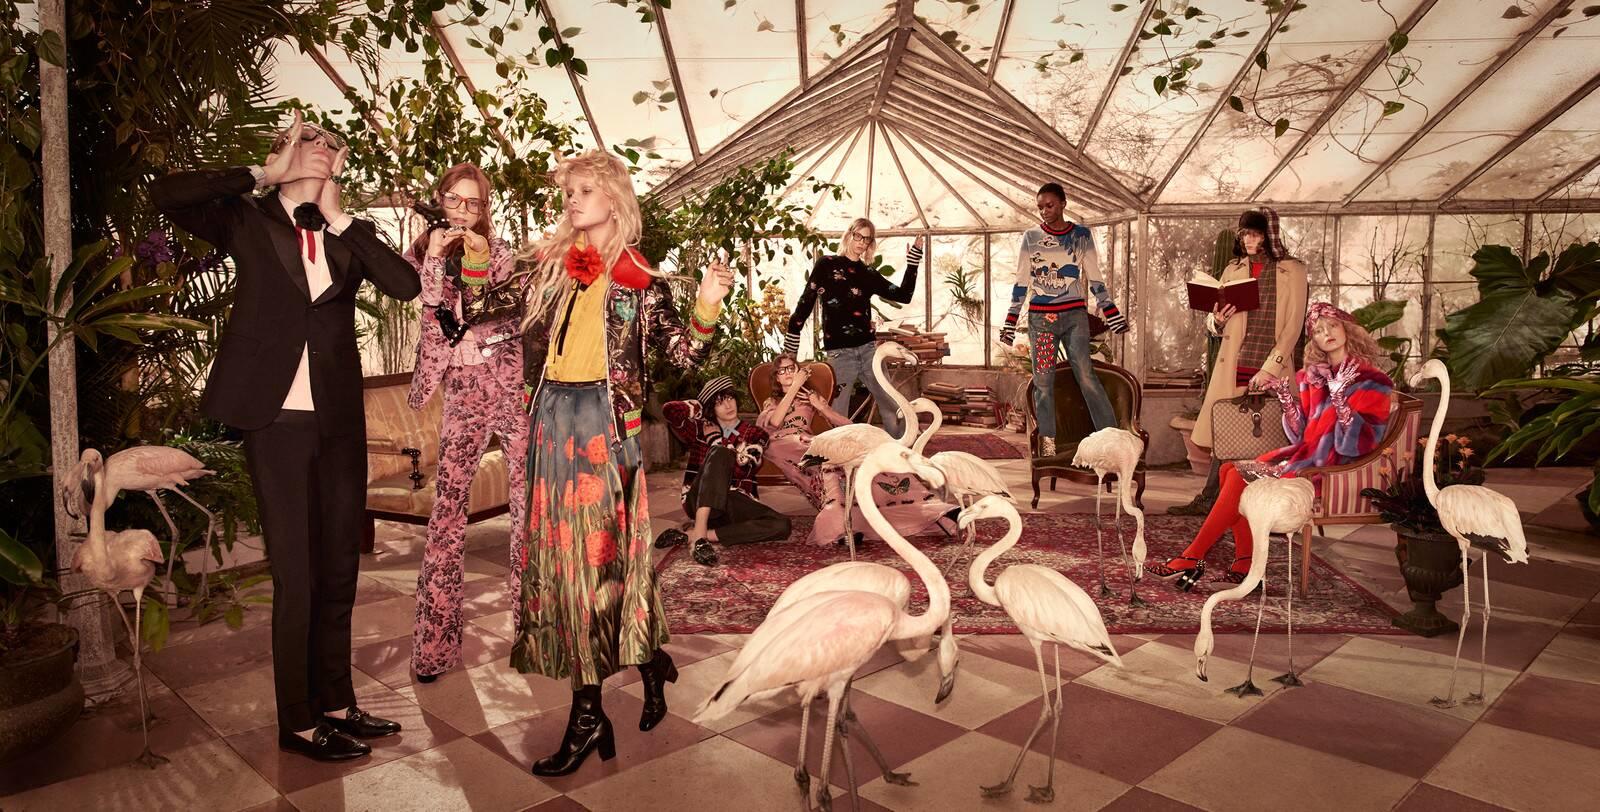 A Gucci advertising campaign photo from Wild Wonderland 2016